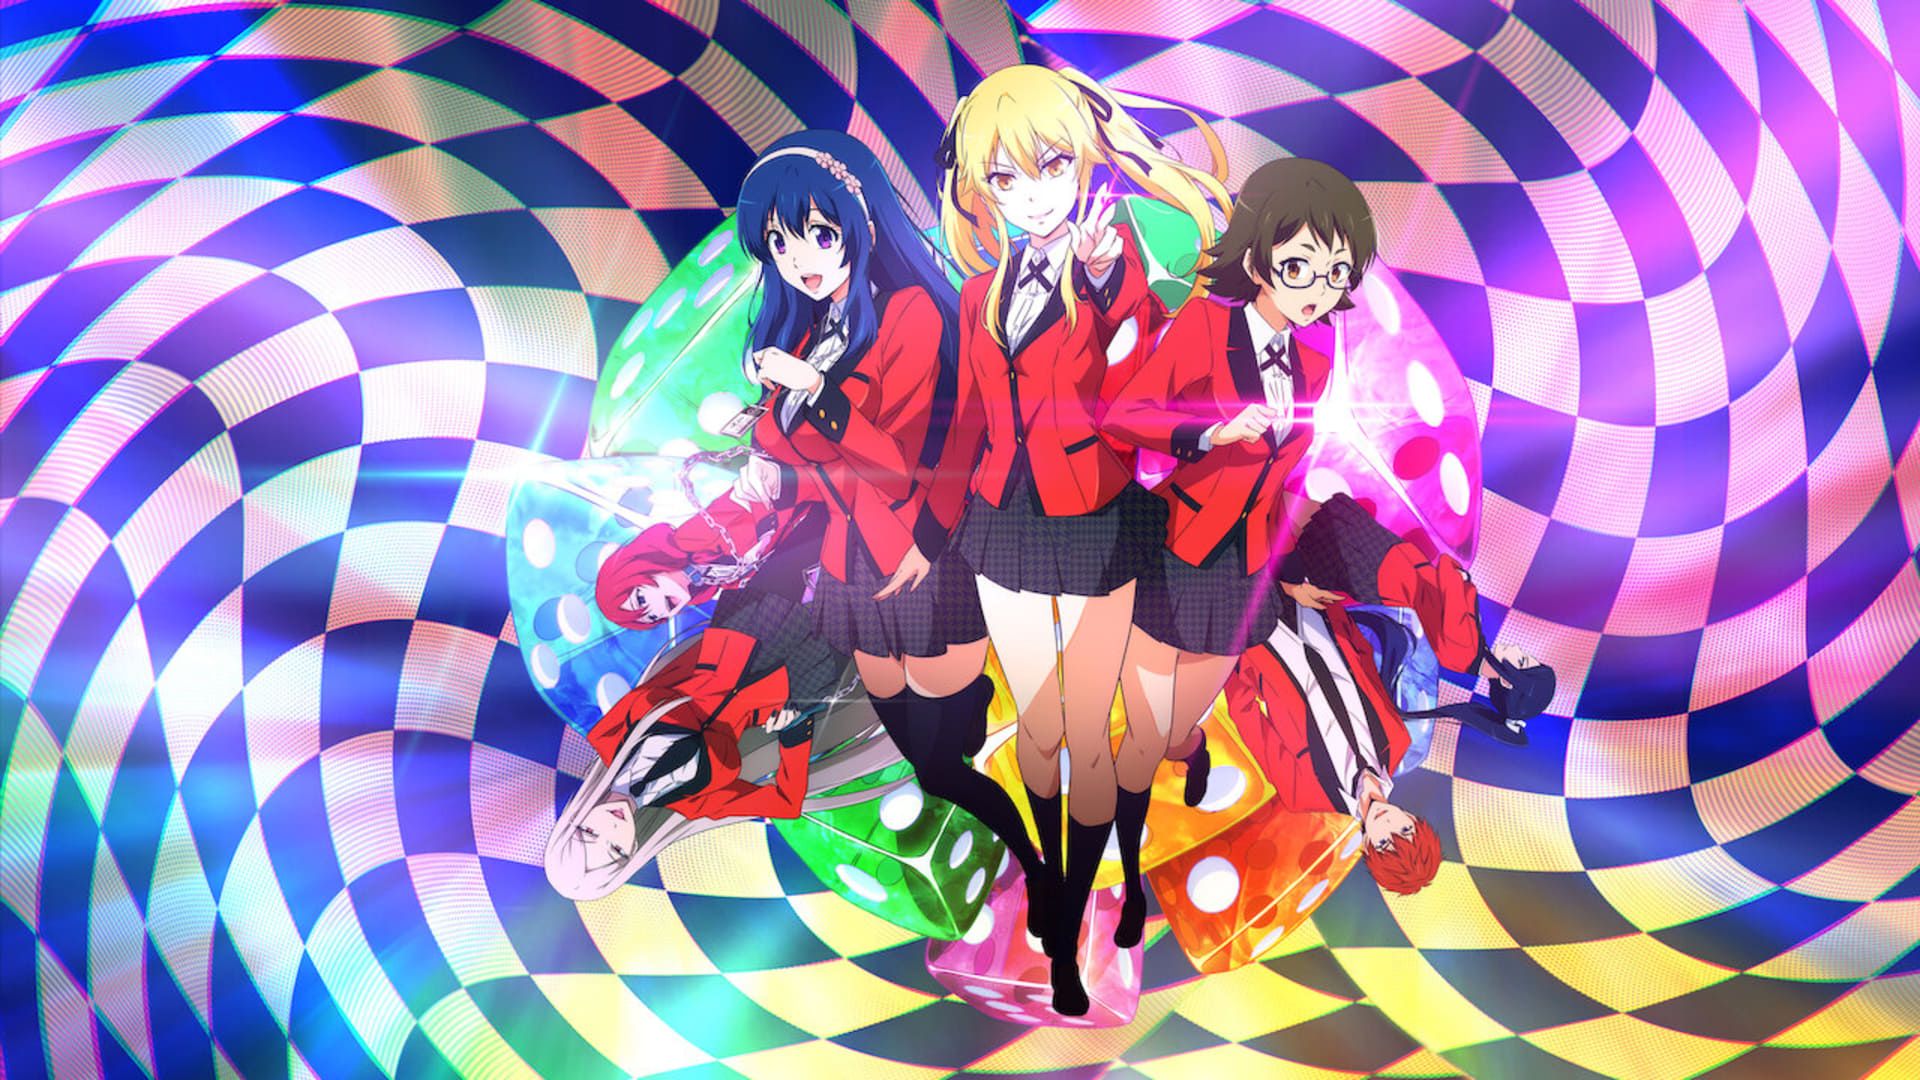 Kakegurui Twin Releases Trailer and Visual, Will Premiere on August 4